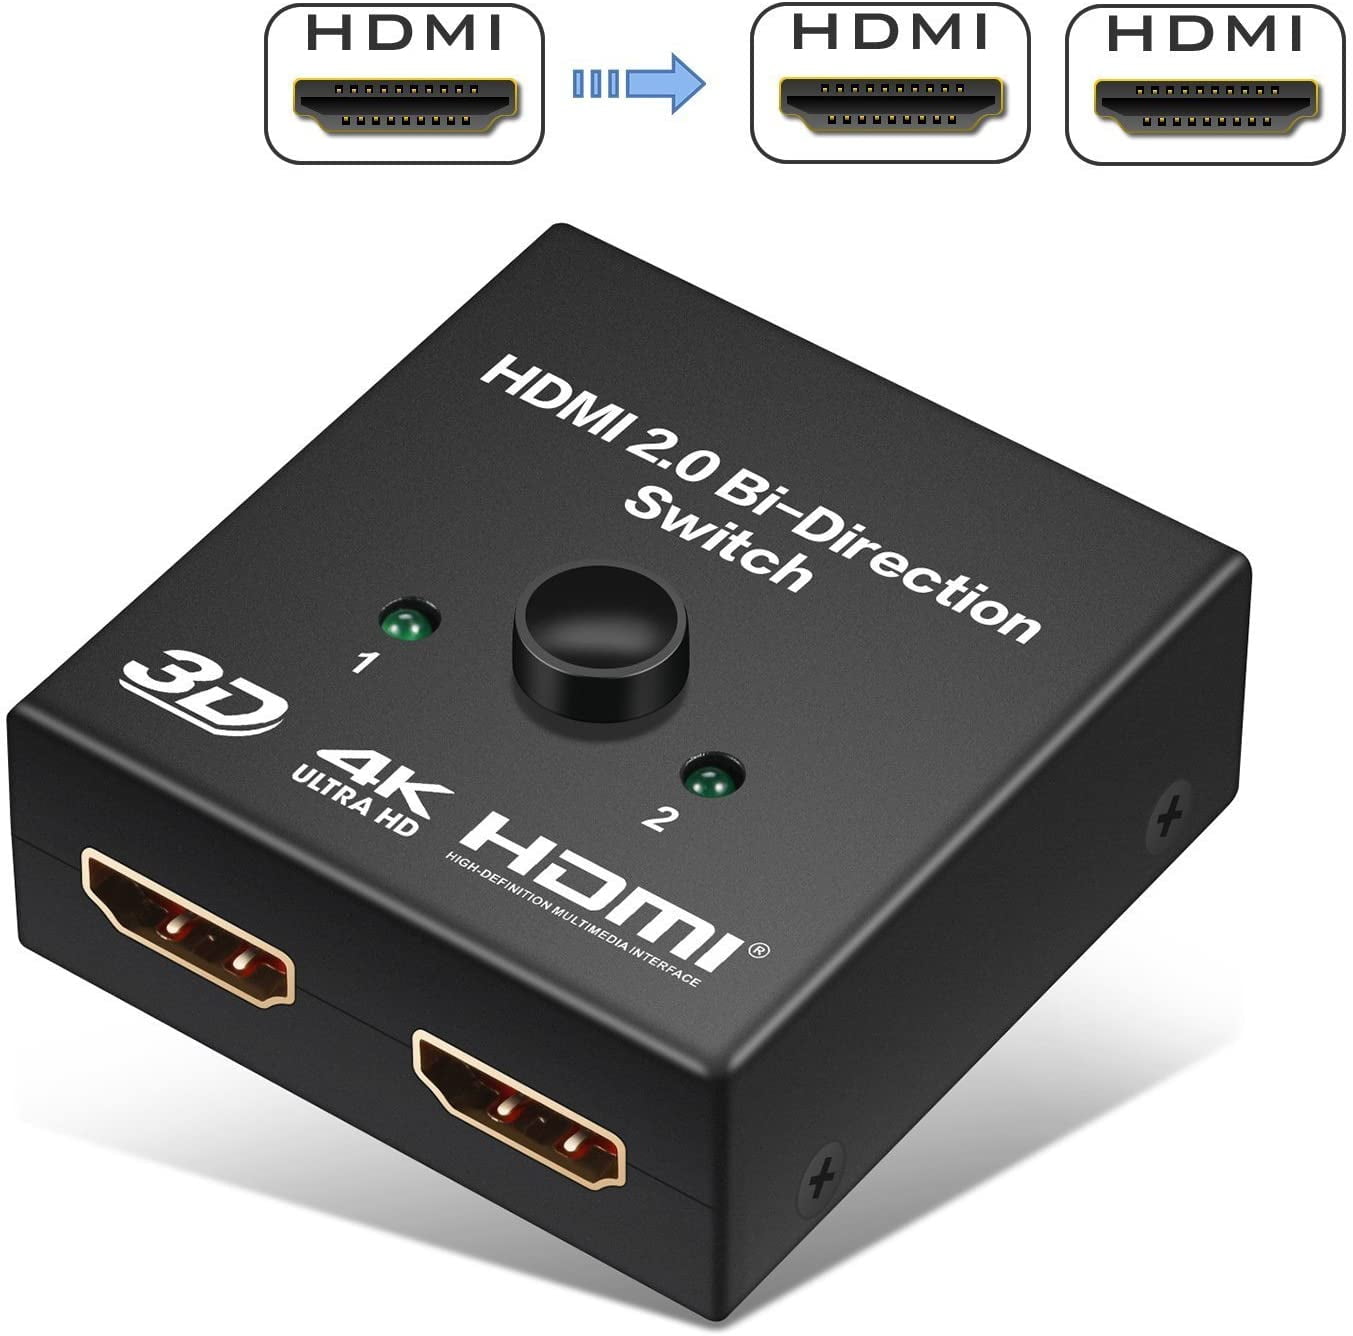 ZACCAS Aluminum 4K HDMI Switcher Bidirectional 2 in 1 Out or 1 in 2 Out Supports HD 4K 3D for HD TV/Blu-Ray Player/Xbox/PS3/PS4/Roku/Fire Stick HDMI Switch 4K HDMI Splitter